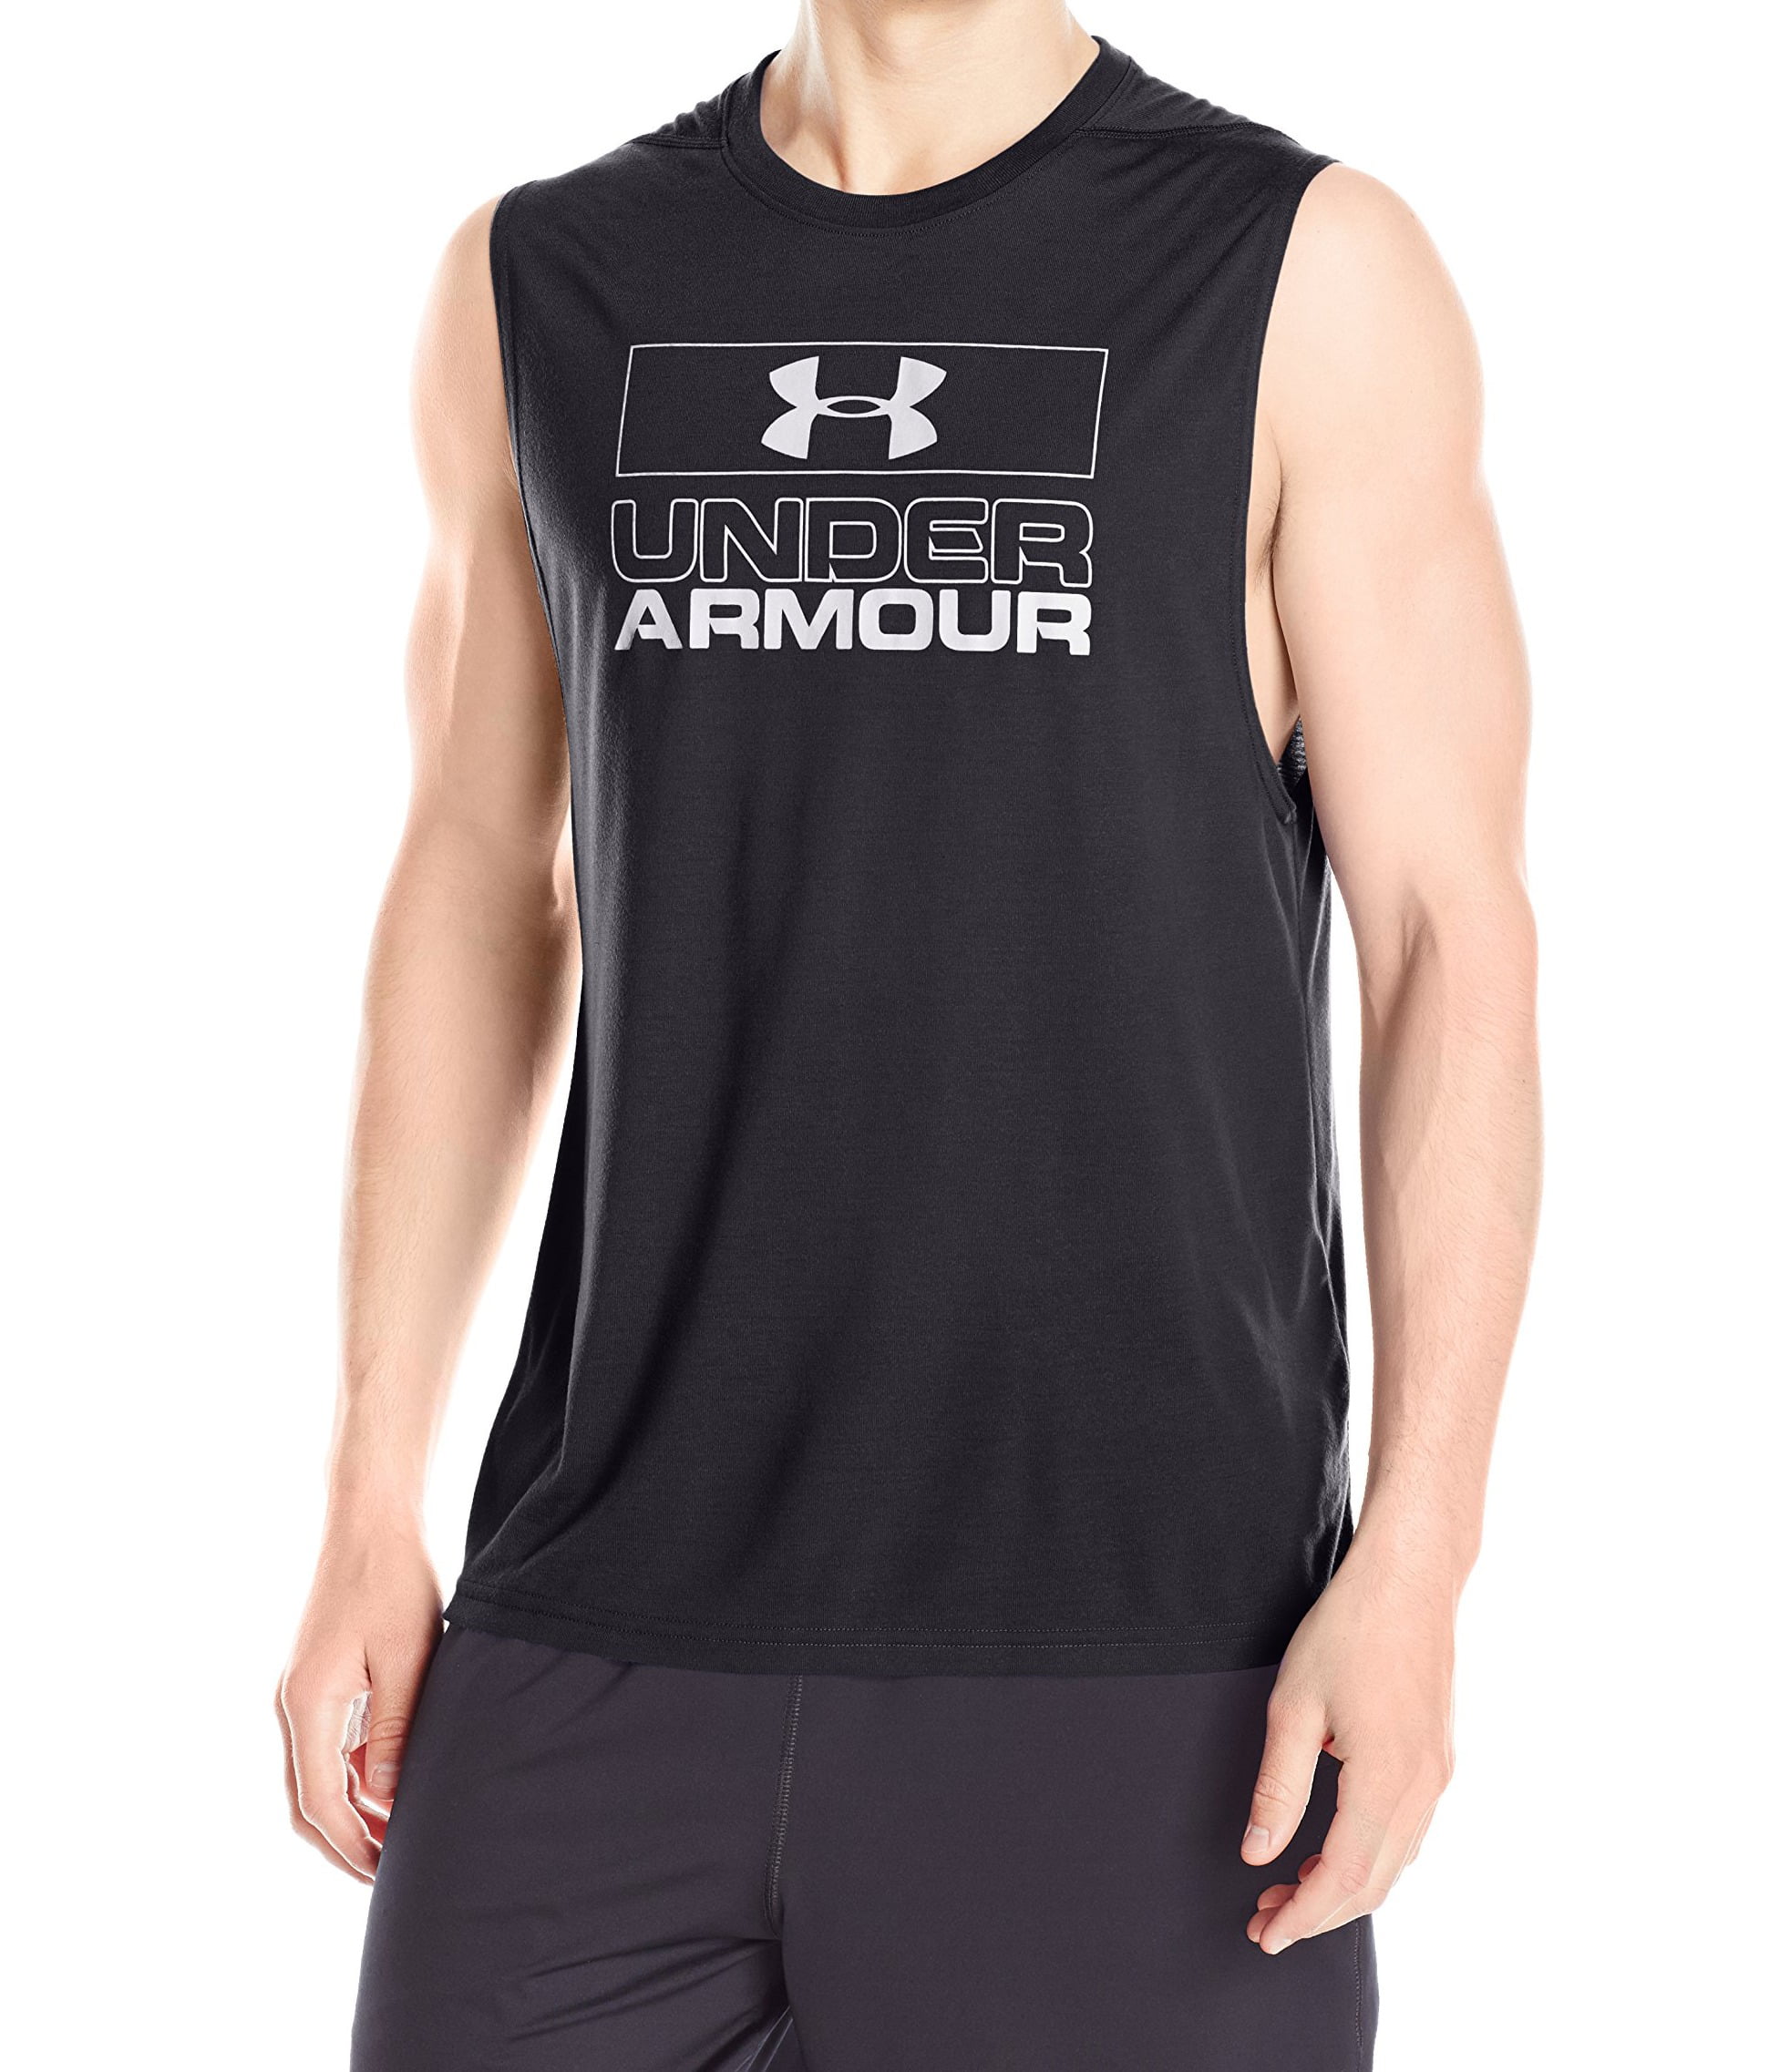 Under Armour - Under Armour NEW Black Mens Size Large L Logo Graphic ...